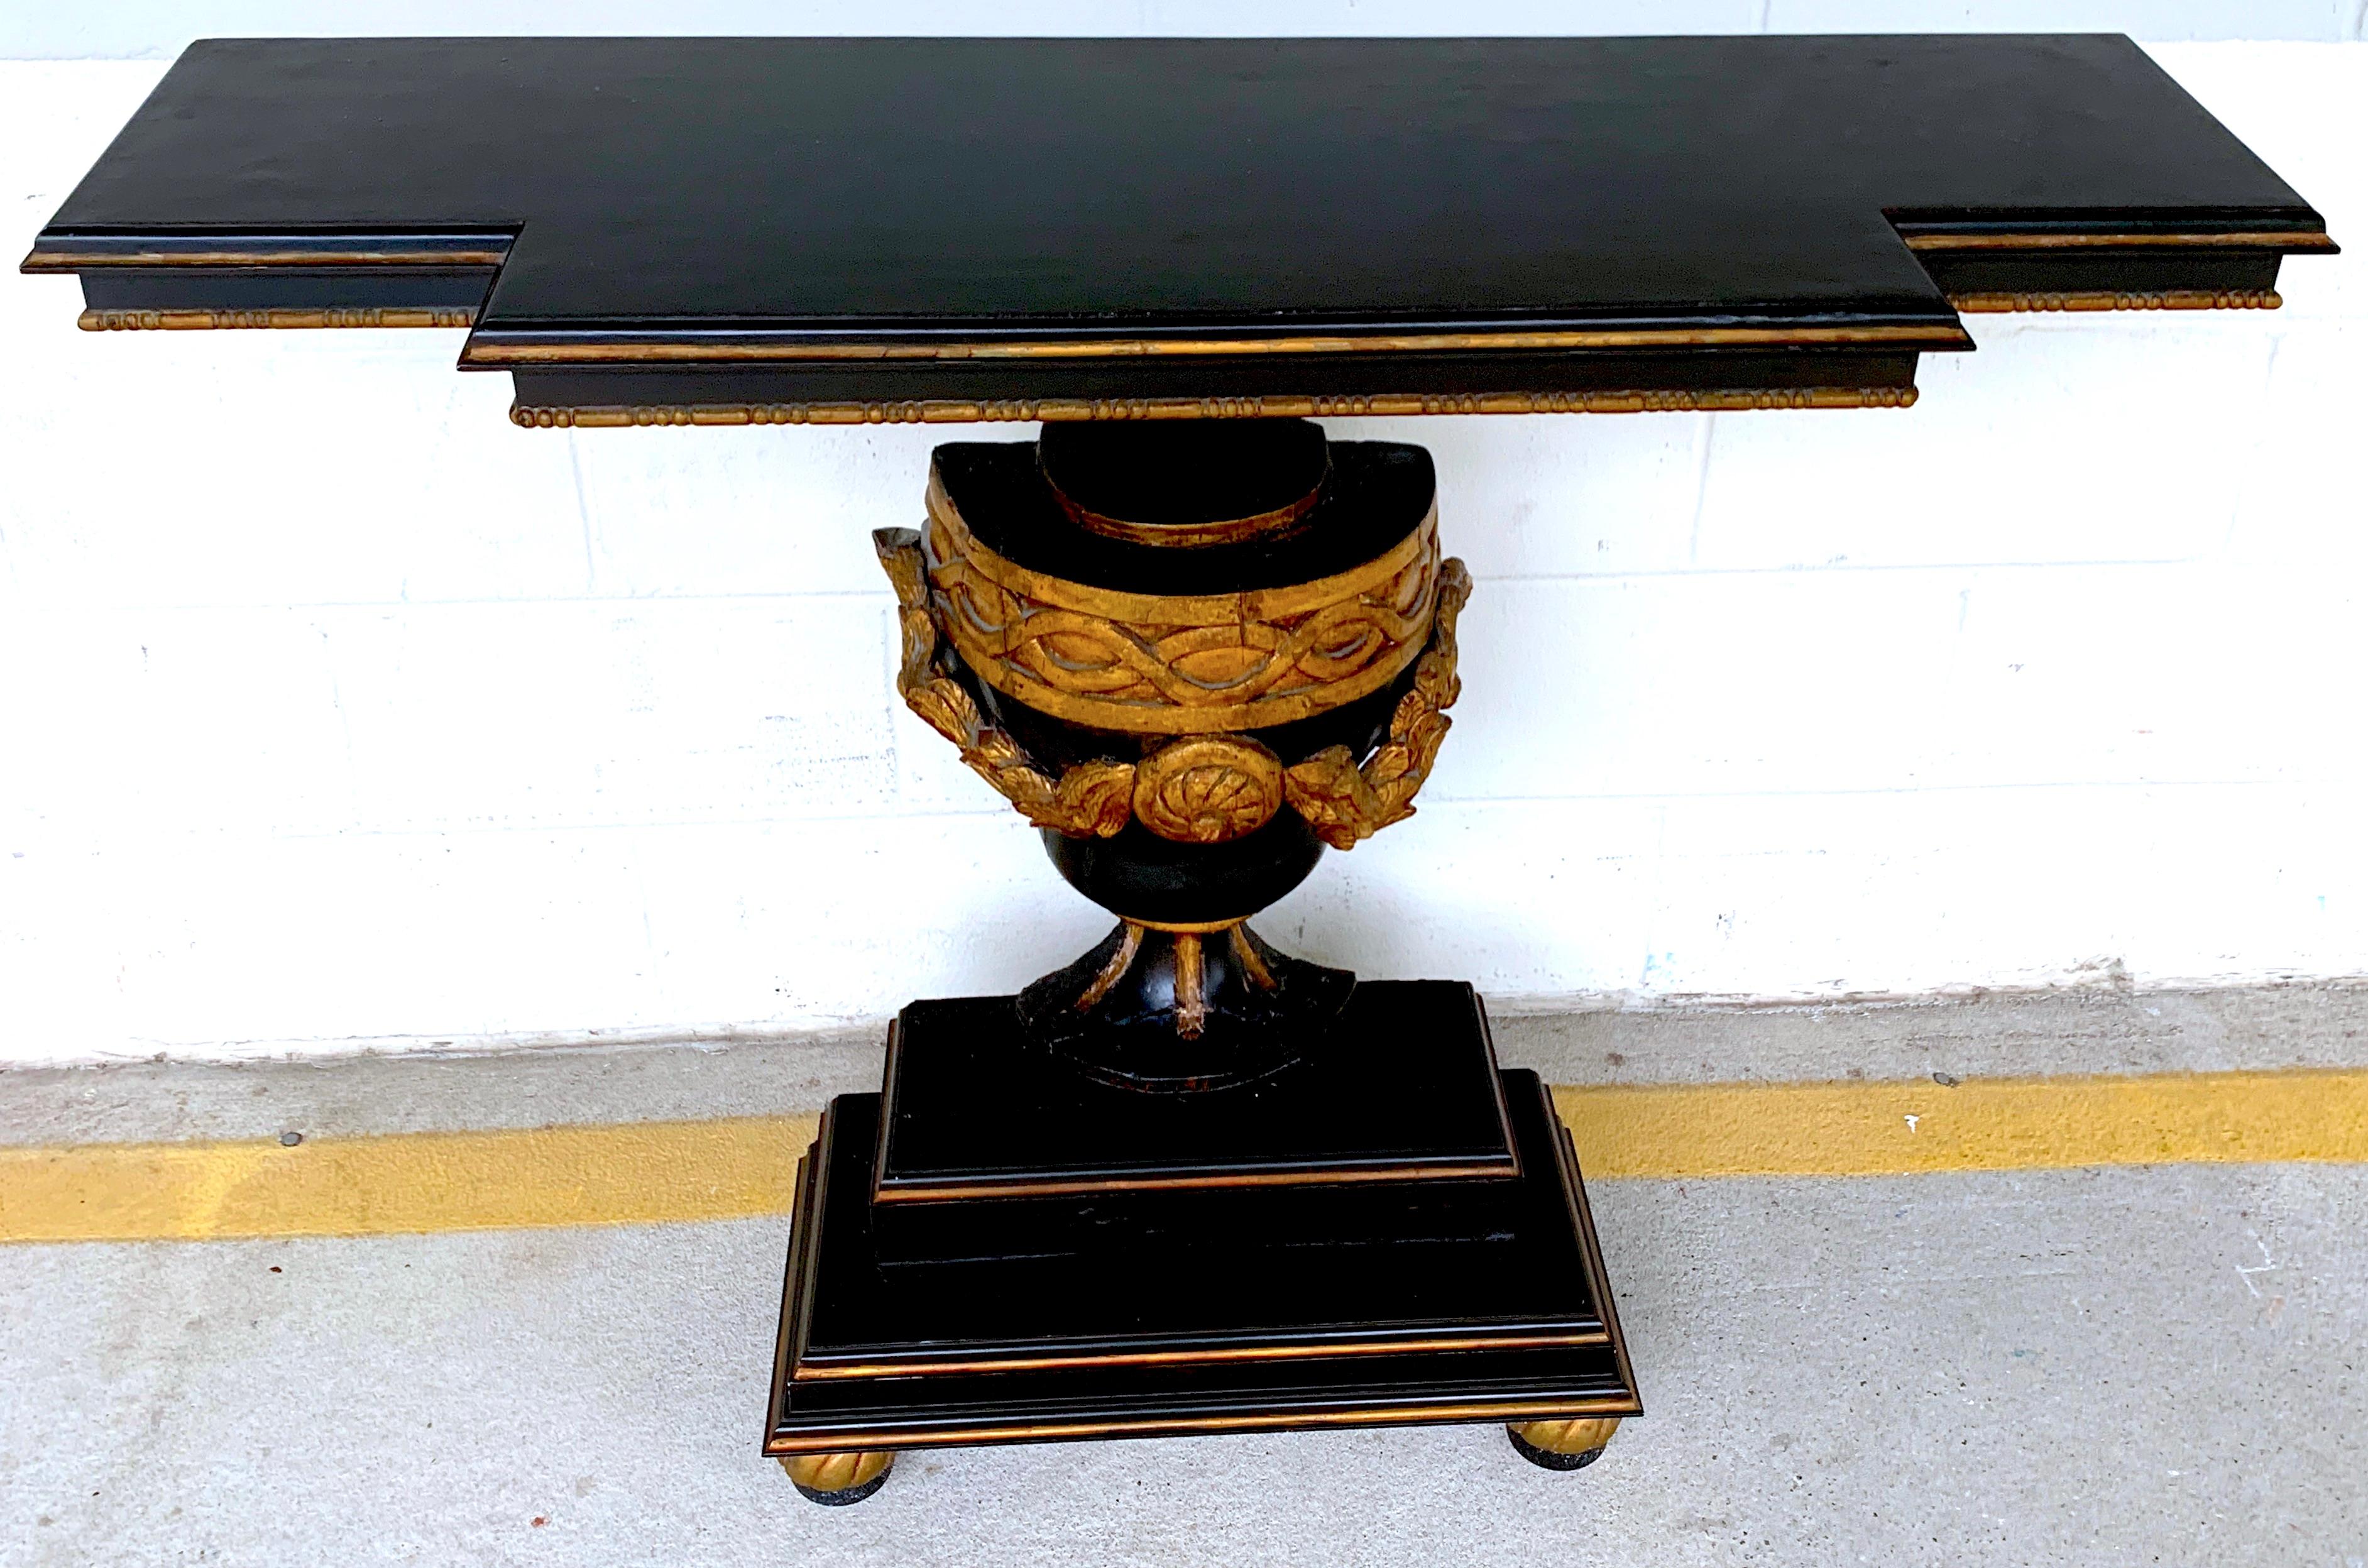 19th continental ebonized and gilt neoclassical carved urn motif console, with canted top with a depth of 10-inches deep at the narrowest and 14-inches deep at the widest, raised on a carved giltwood and ebonized urn motif pedestal base, measuring